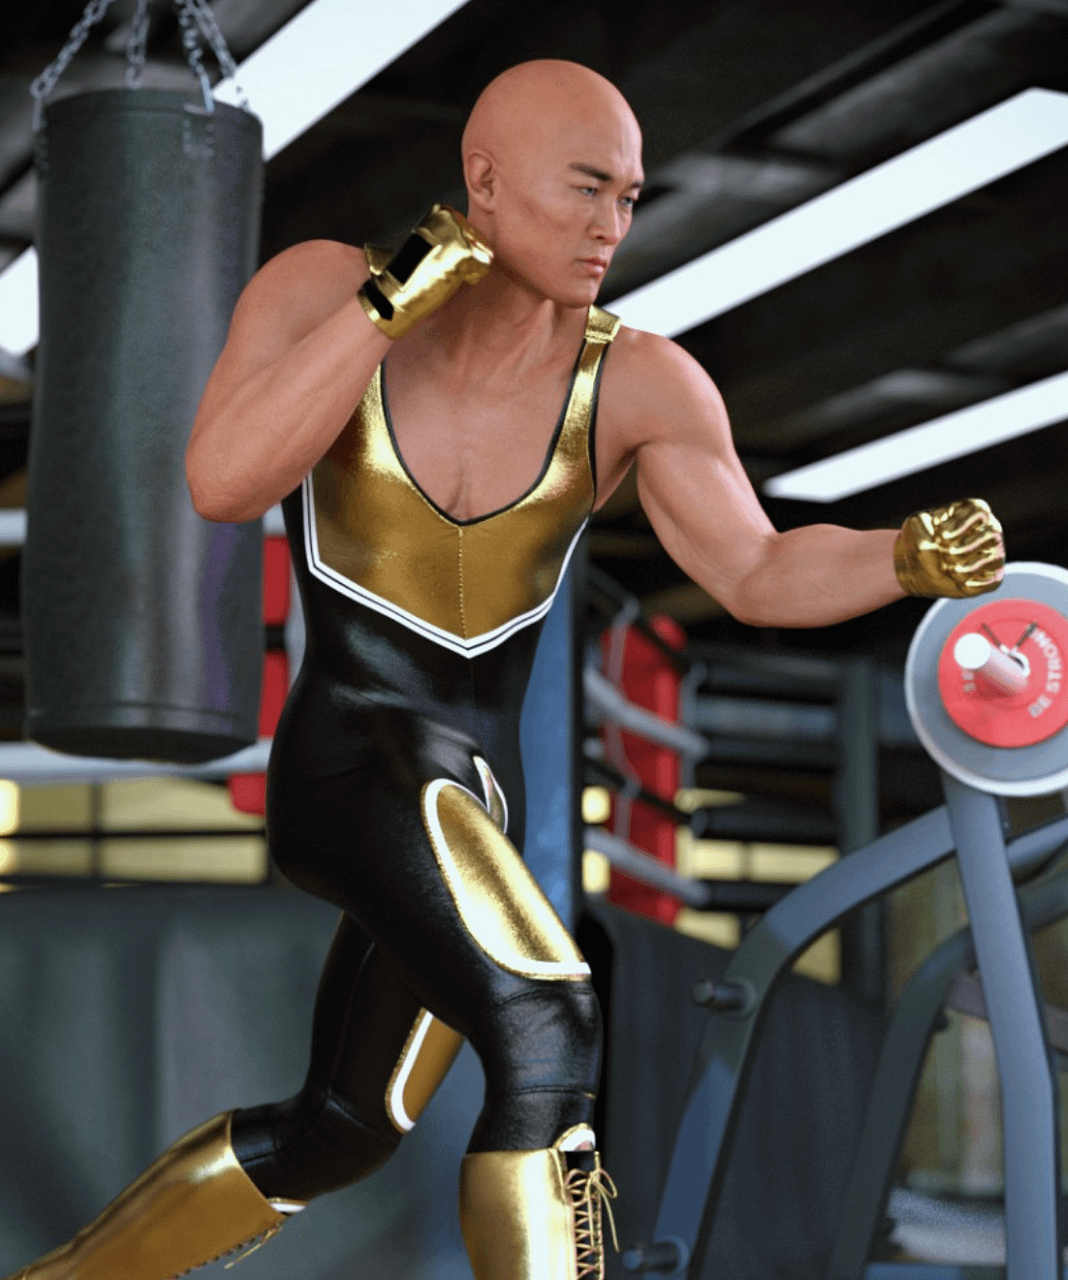 genesis male wrestling outfit